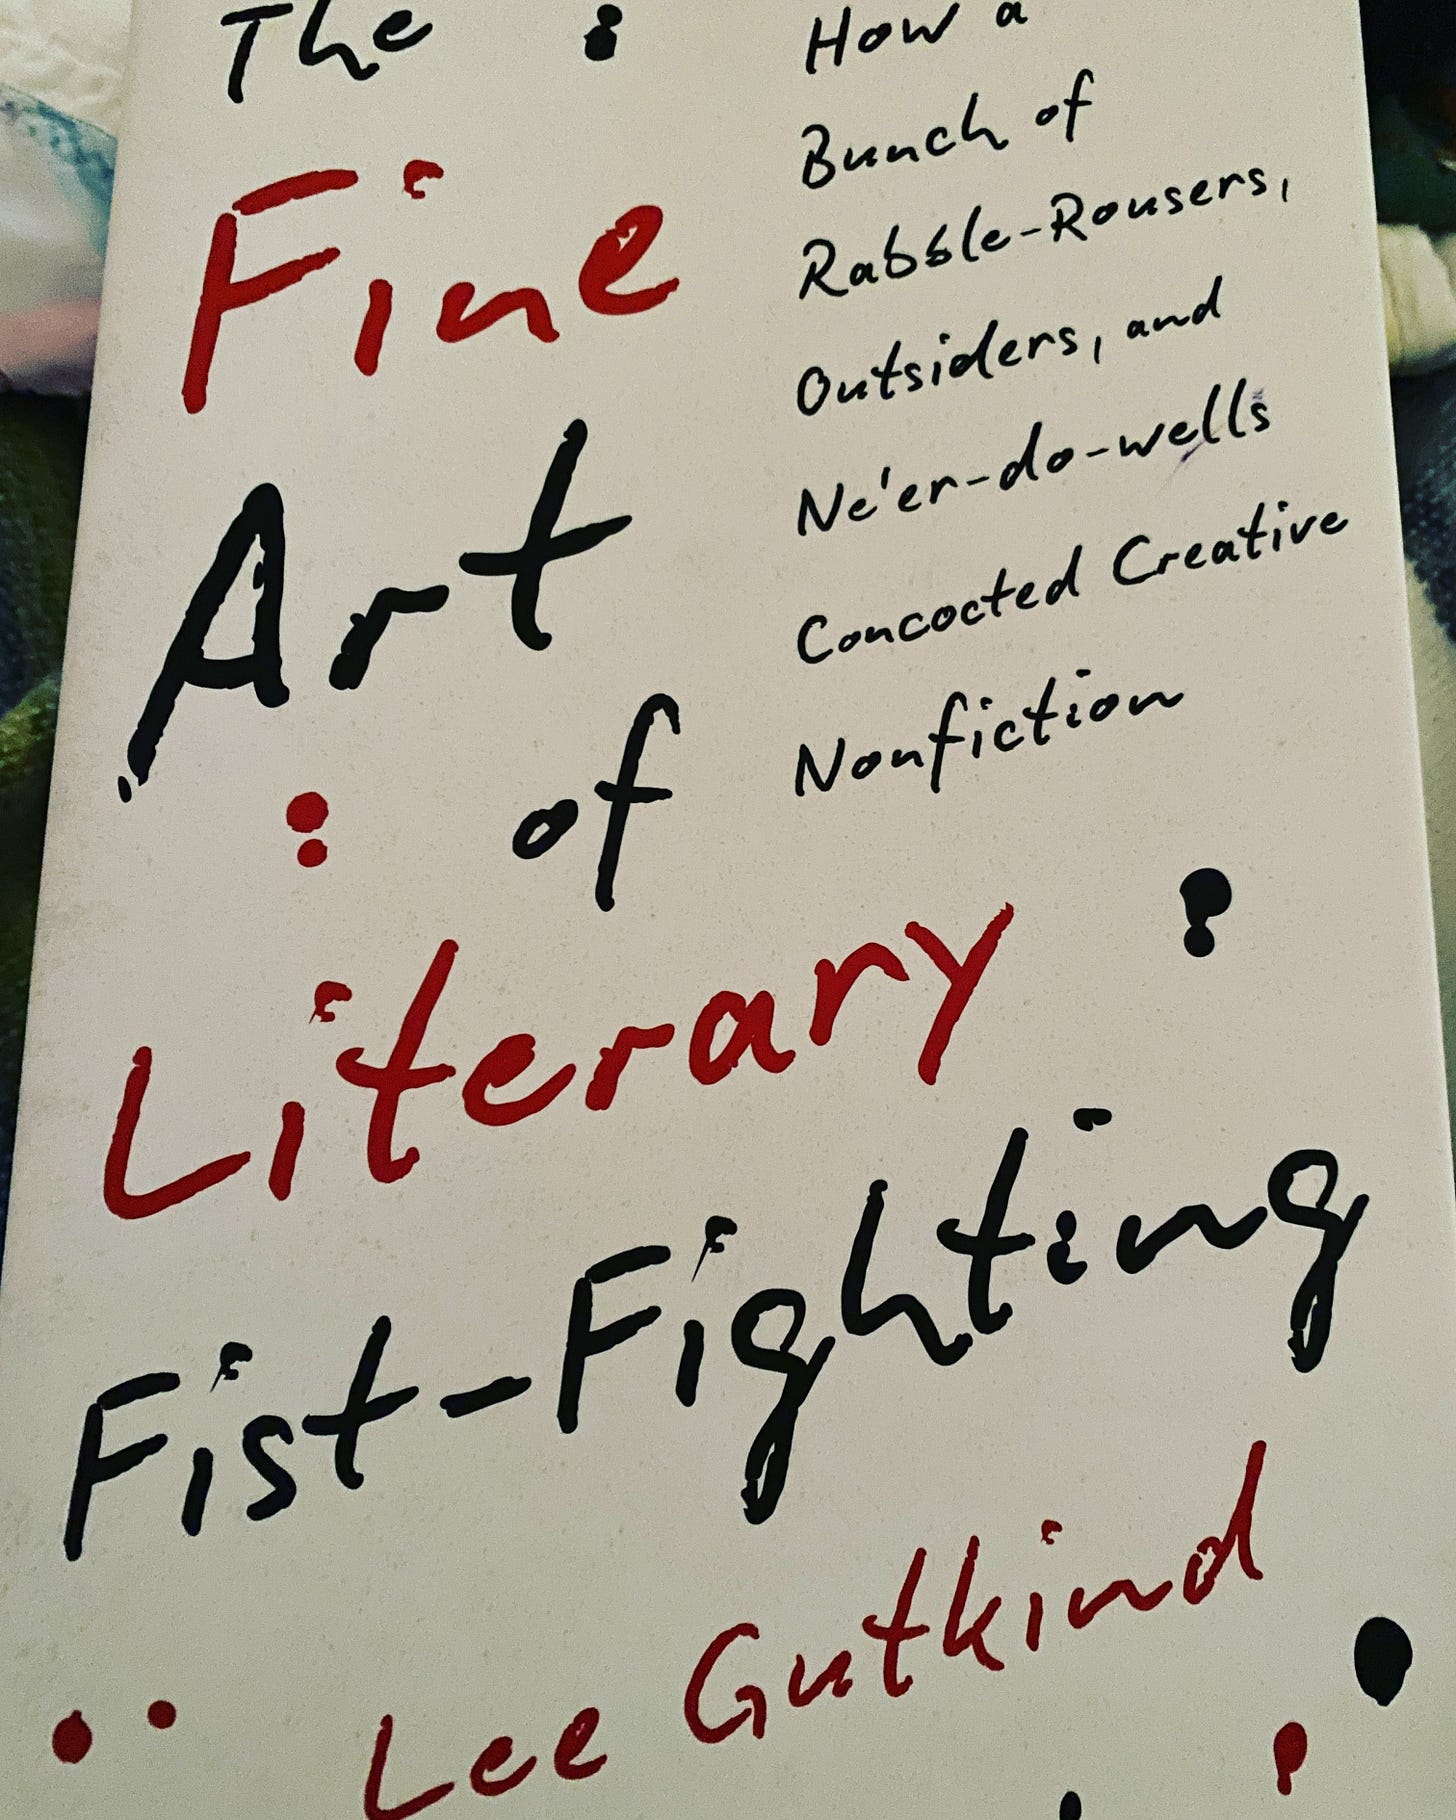 Cover of The Fine Art of Literary Fist-Flighting by Lee Gutkind